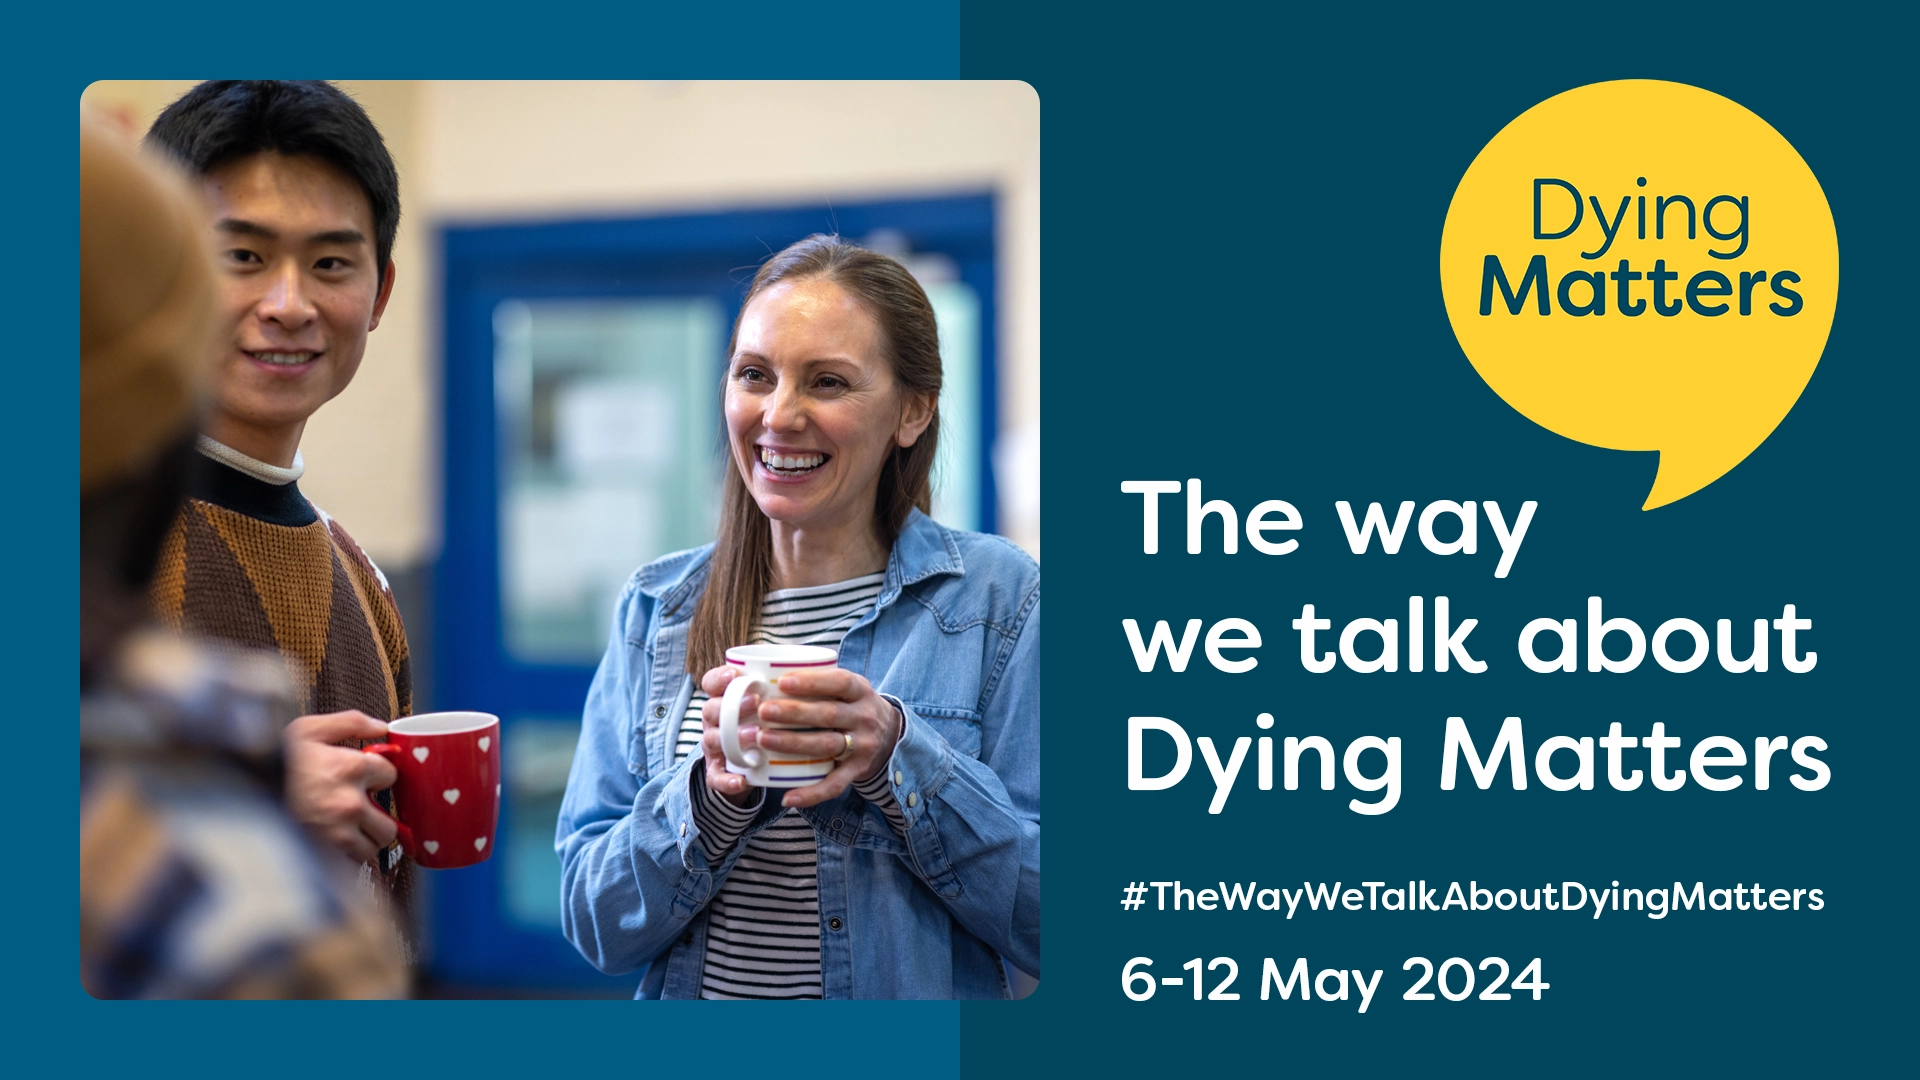 An informative image of a group of people talking titled "The way we talk about dying matters, 6th to 12th of May", with the Hashtag "#TheWayWeTalkAboutDyingMatters"